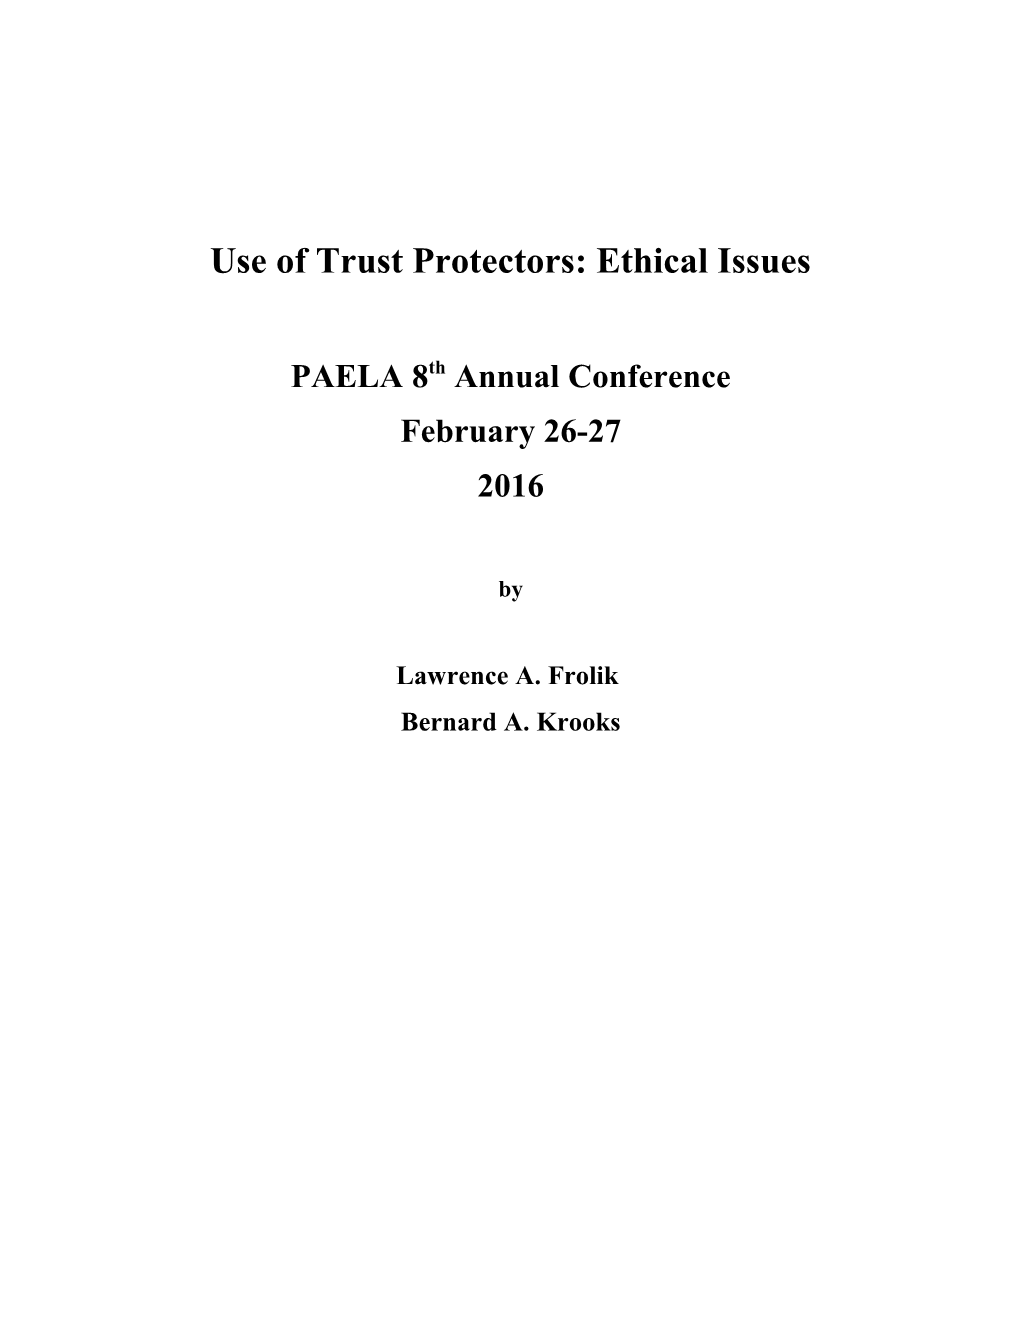 Use of Trust Protectors: Ethical Issues